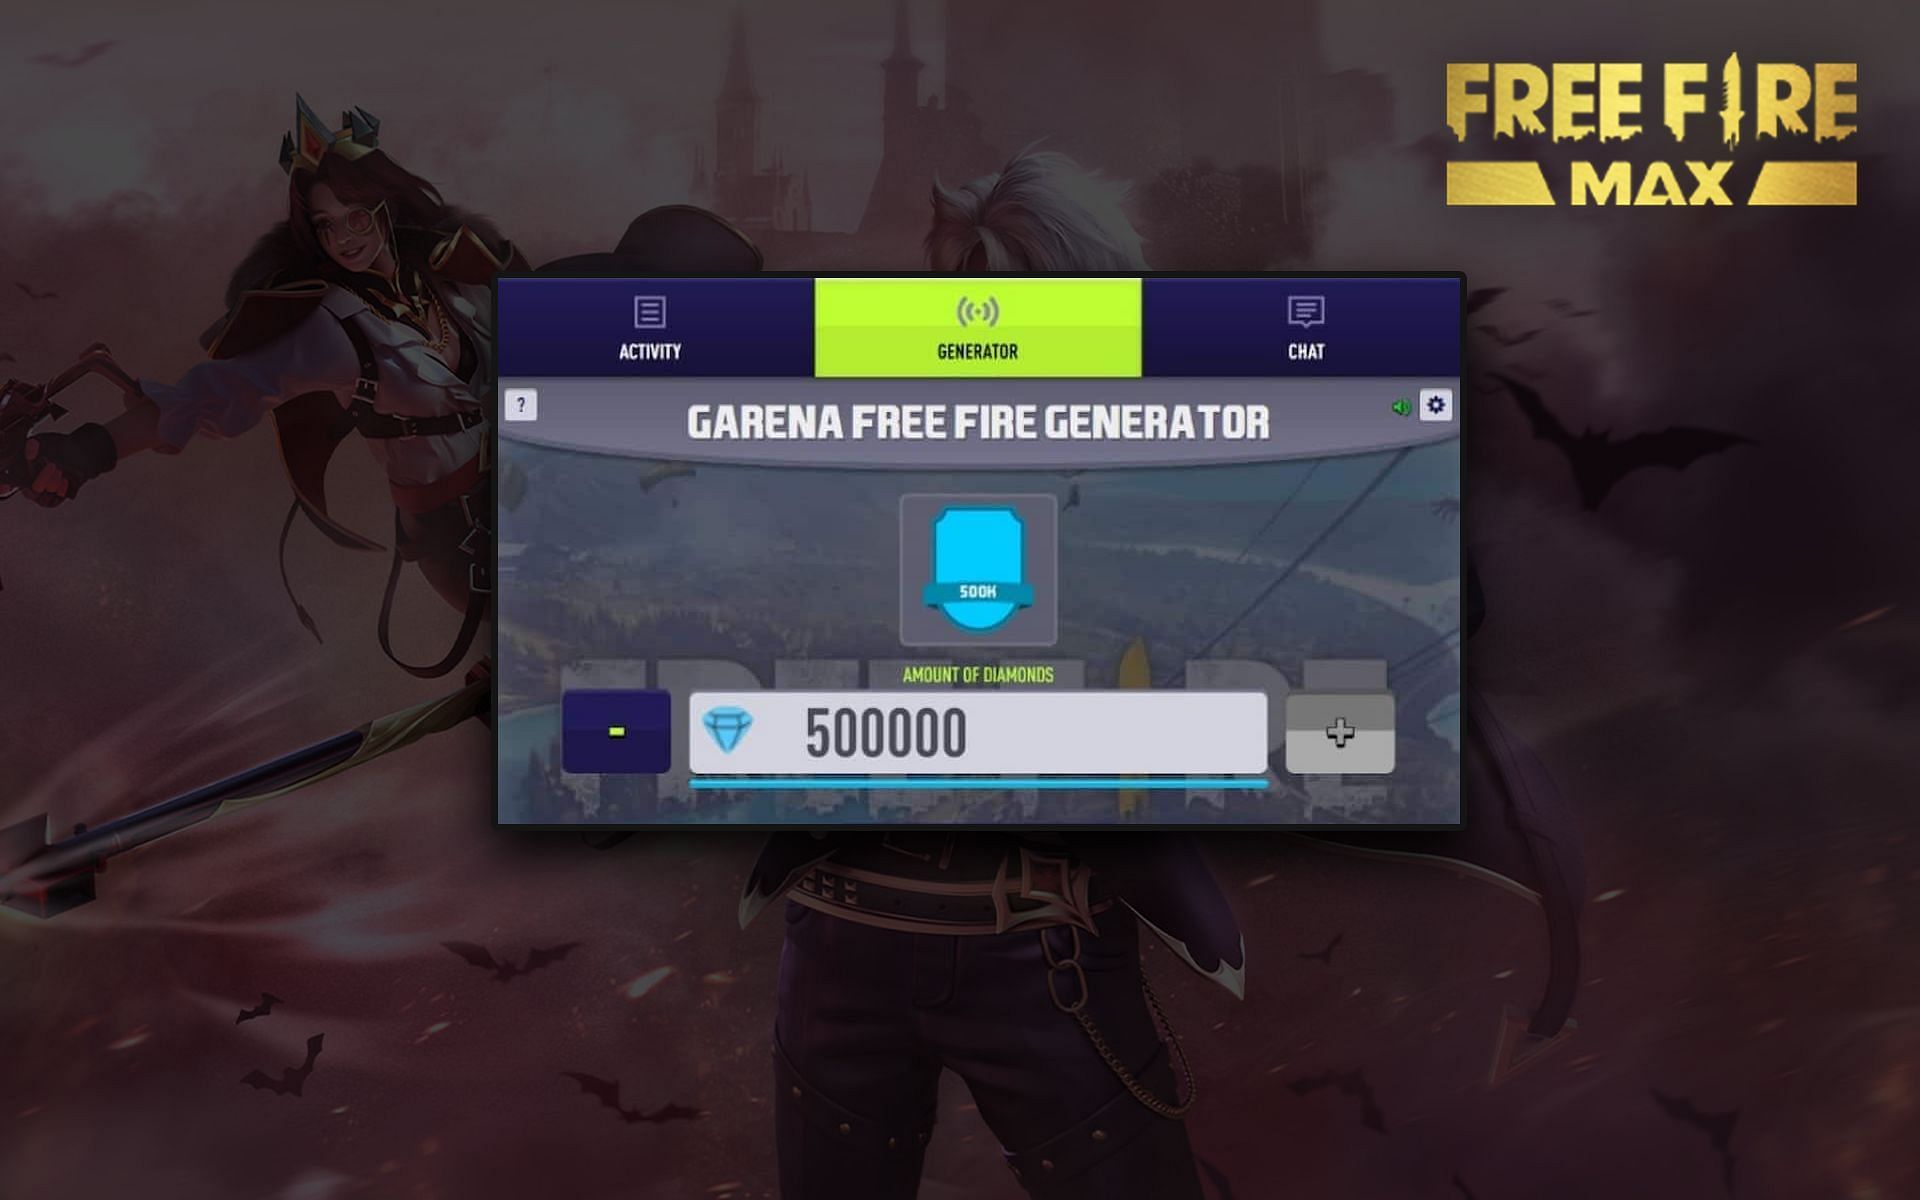 Any Free Fire MAX diamond generator is fake and does not work (Image via Sportskeeda)